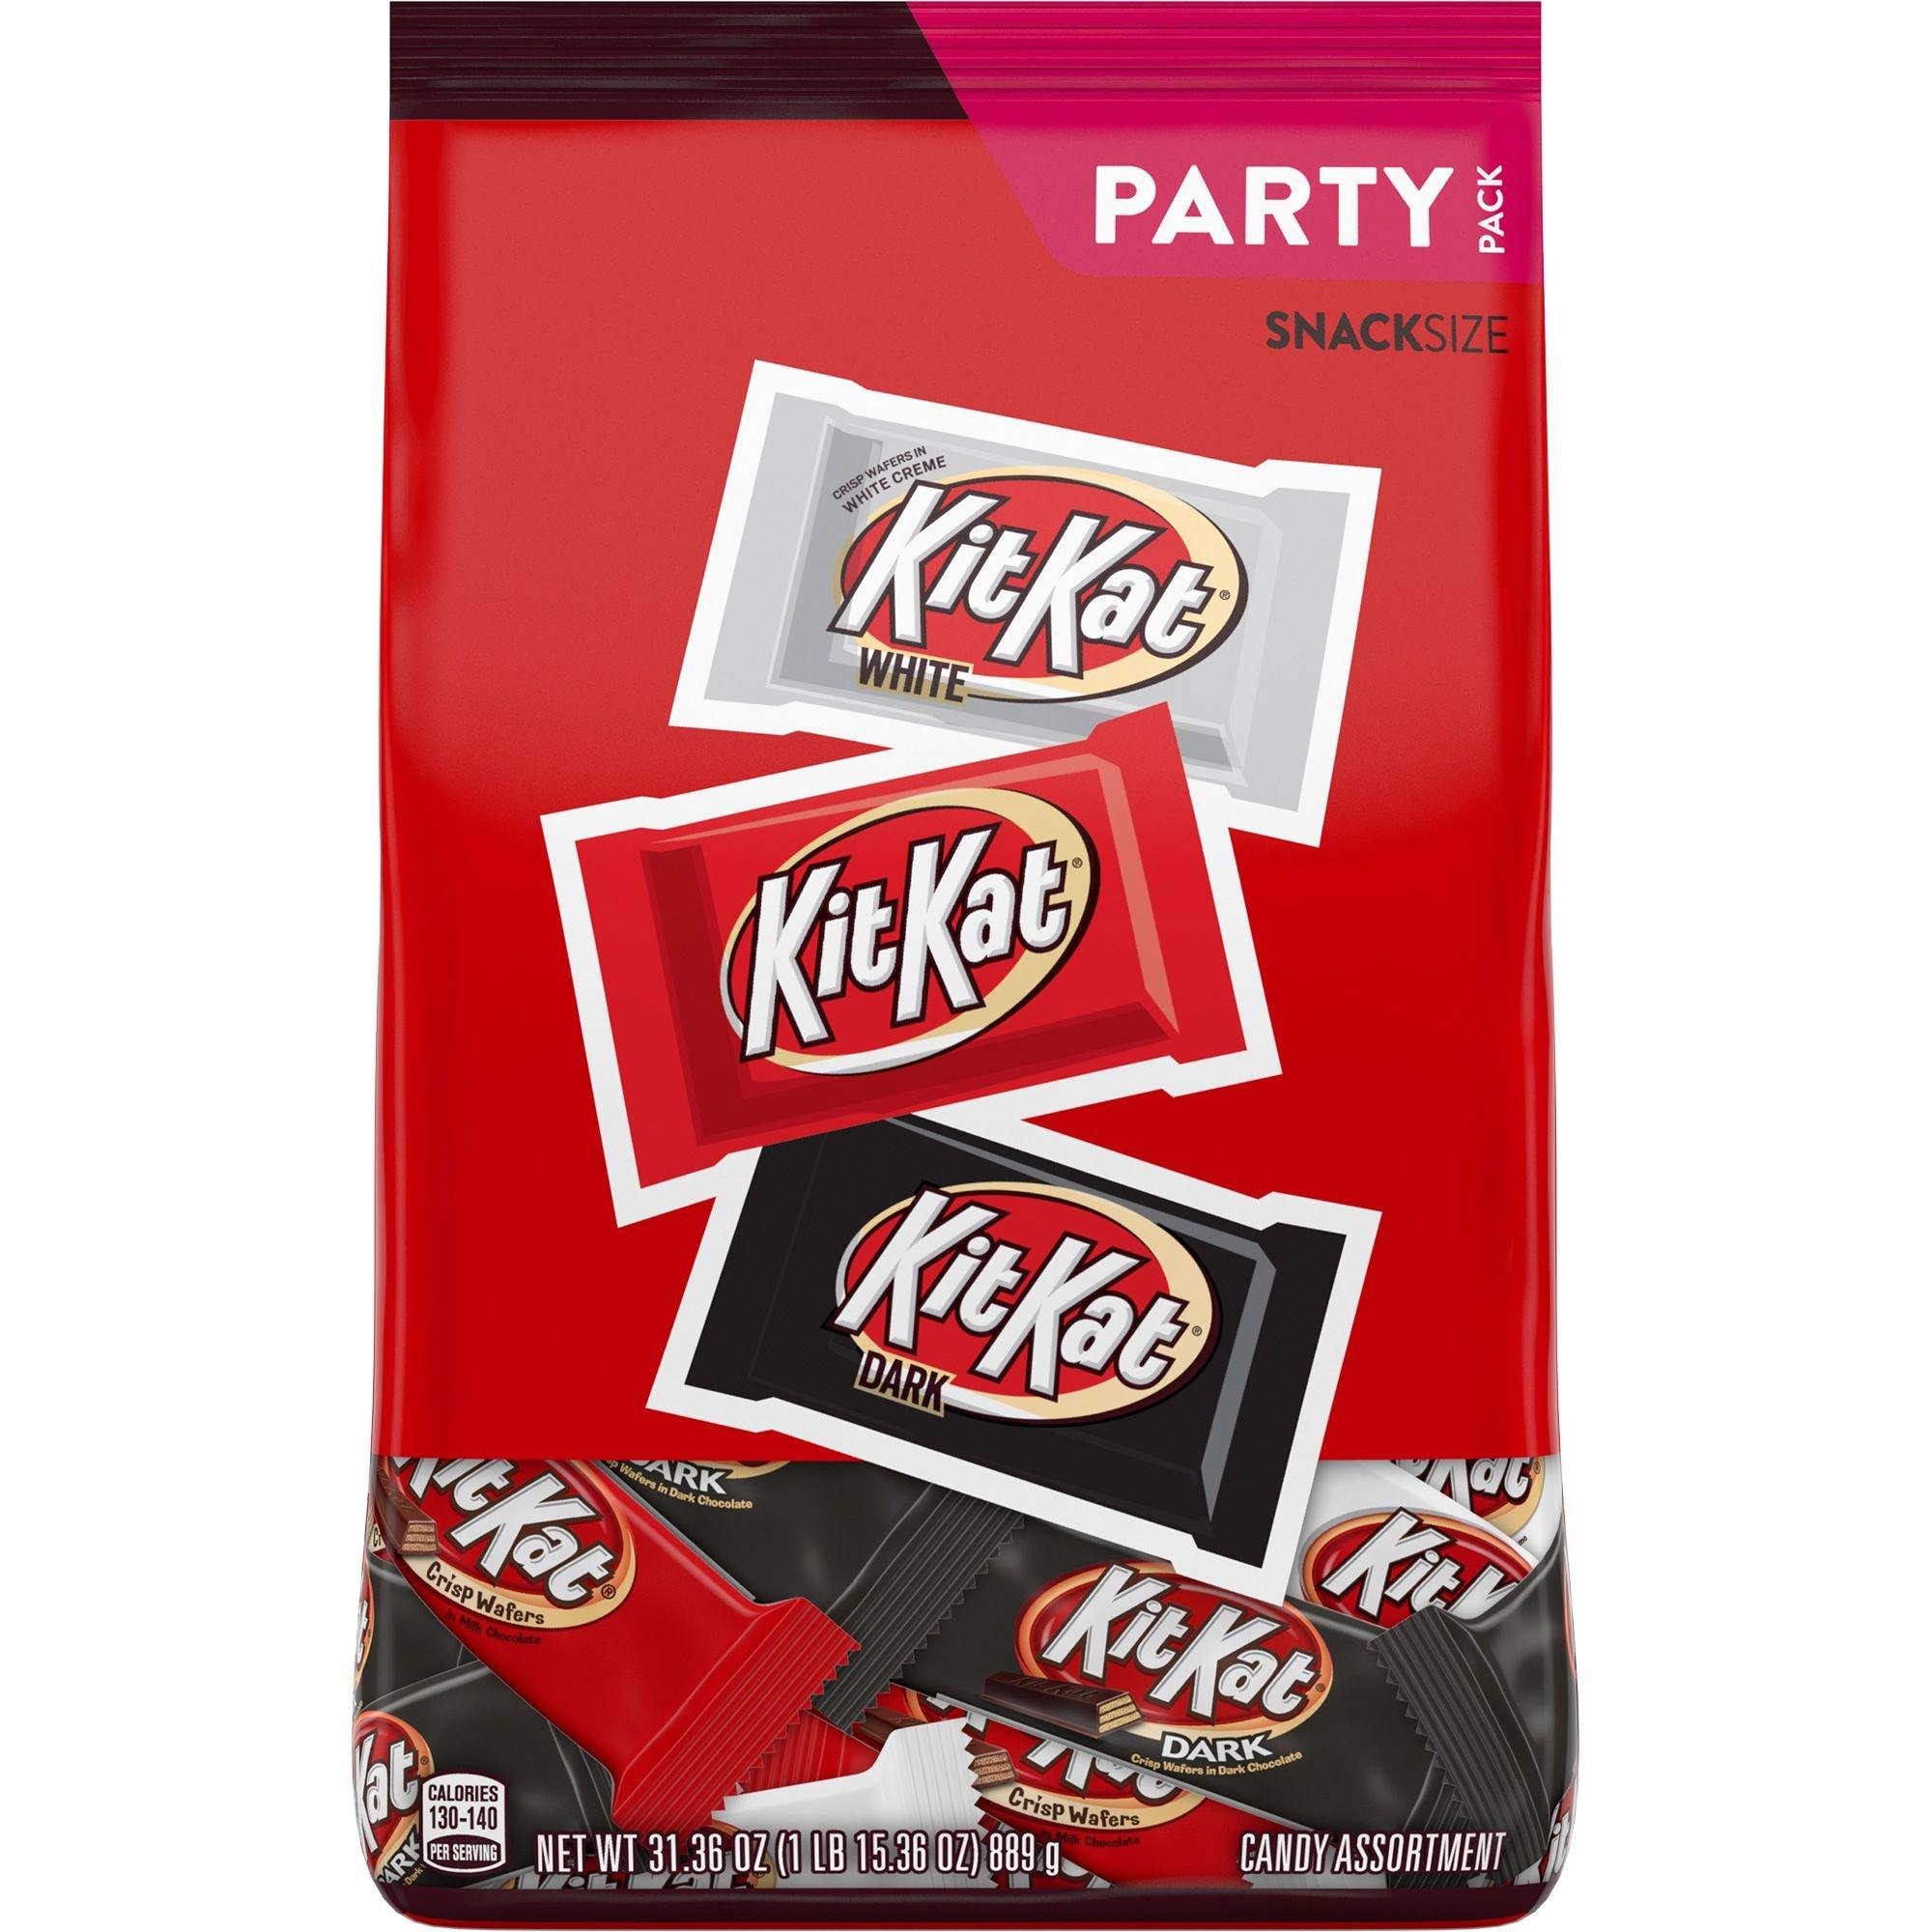 Save on KIT KAT Candy Bars Snack Size Assortment Party Pack Order